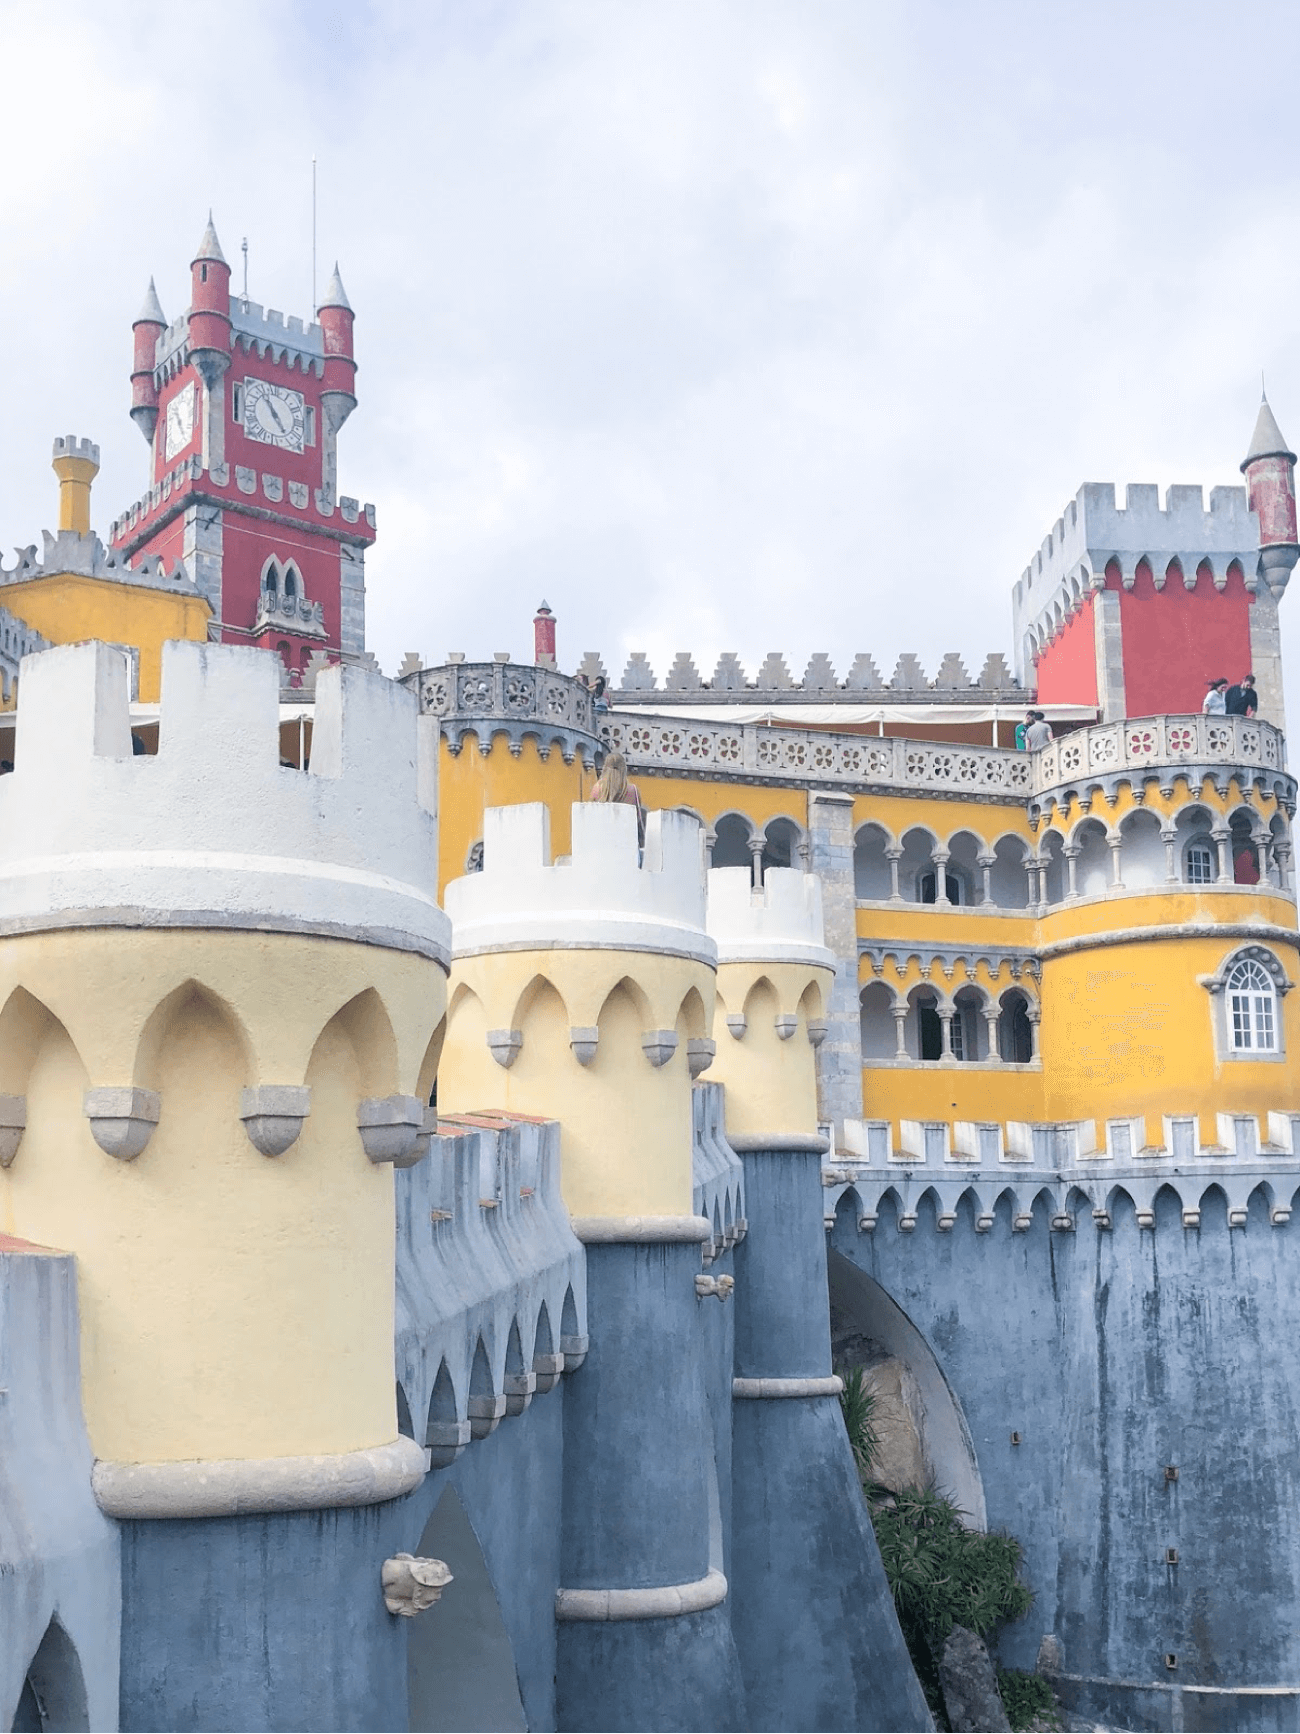 badminton Er velkendte tyveri One Day in Sintra: Top Things to Do For an Unforgettable Day Trip to Sintra